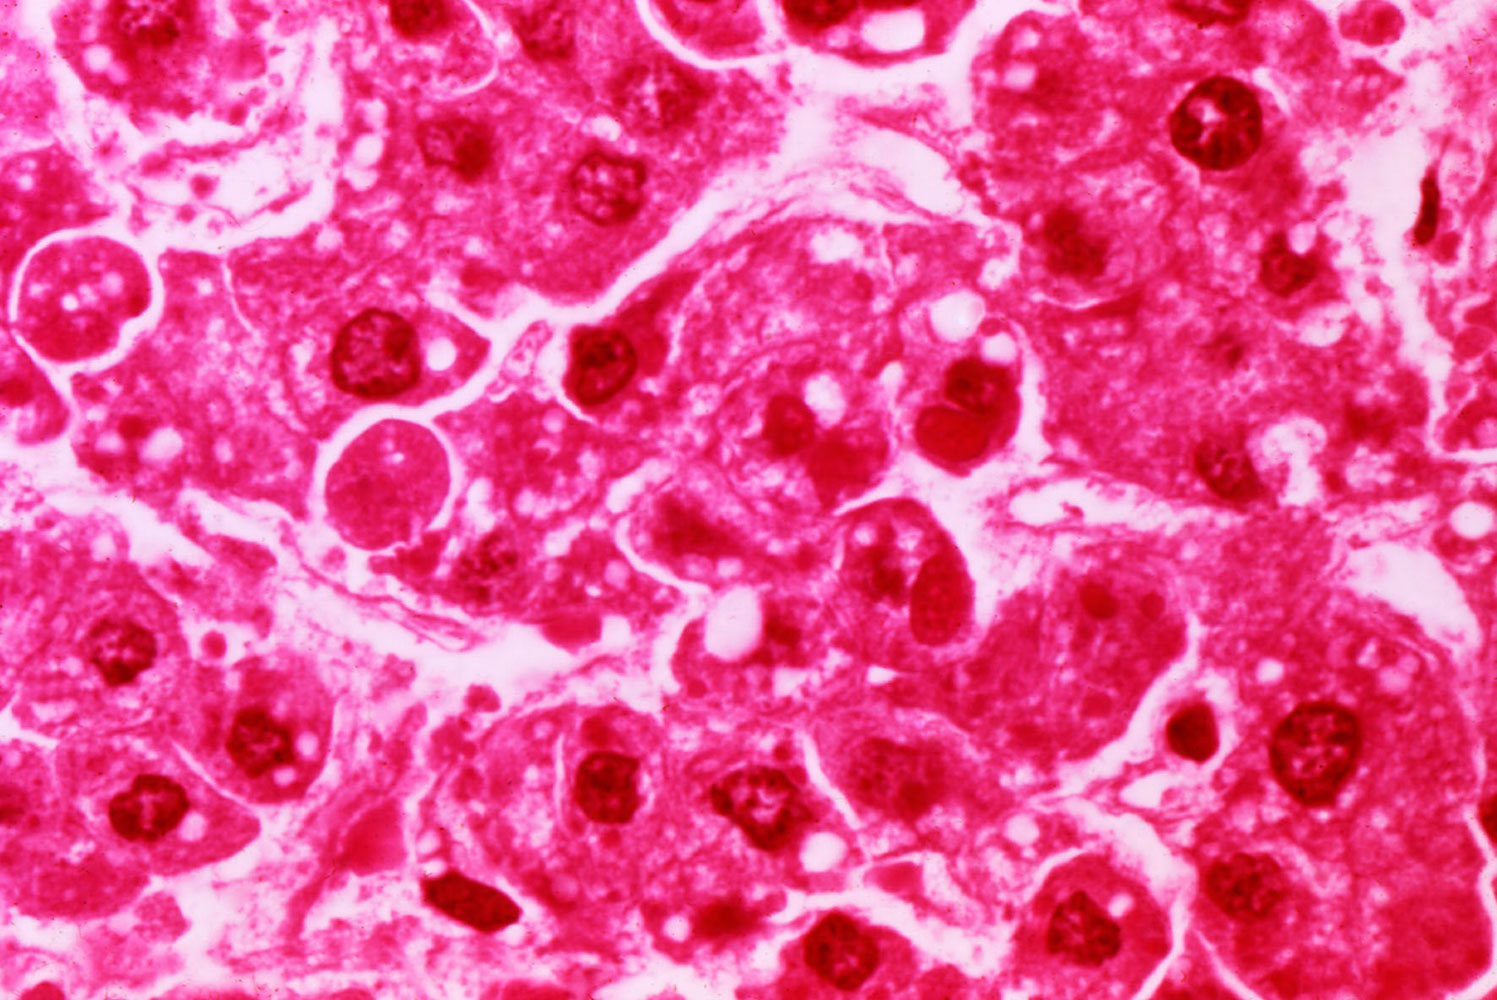 This micrograph reveals human hepatocytes infected with the Ebola virus, the cause of Ebola hemorrhagic fever.